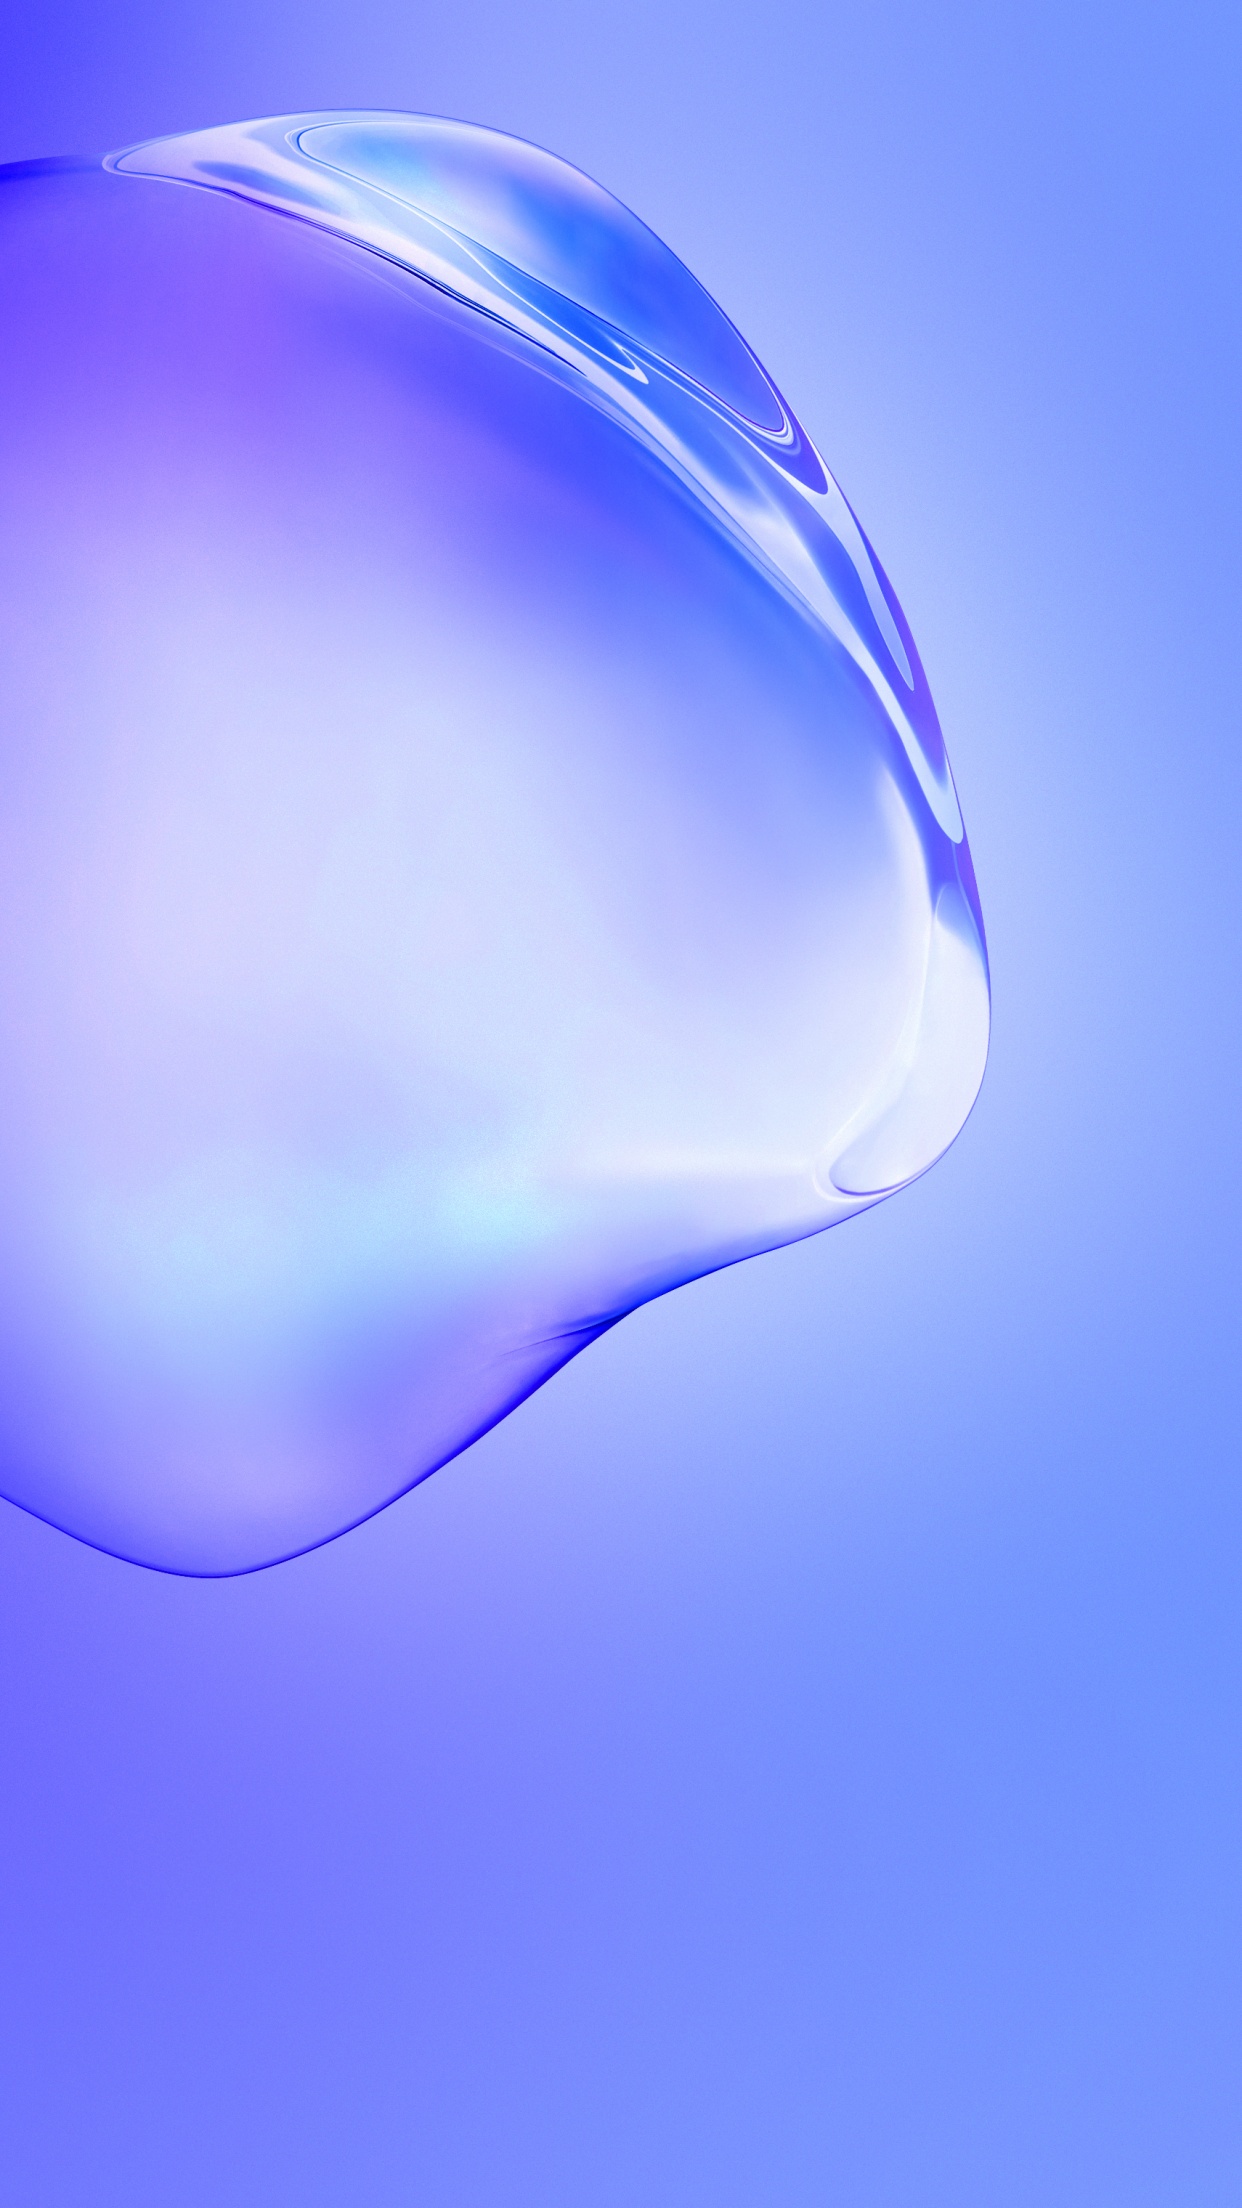 Samsung Galaxy S11 Wallpaper 4K, Blue, Stock, Bubble, Gradients, Abstract, #1705